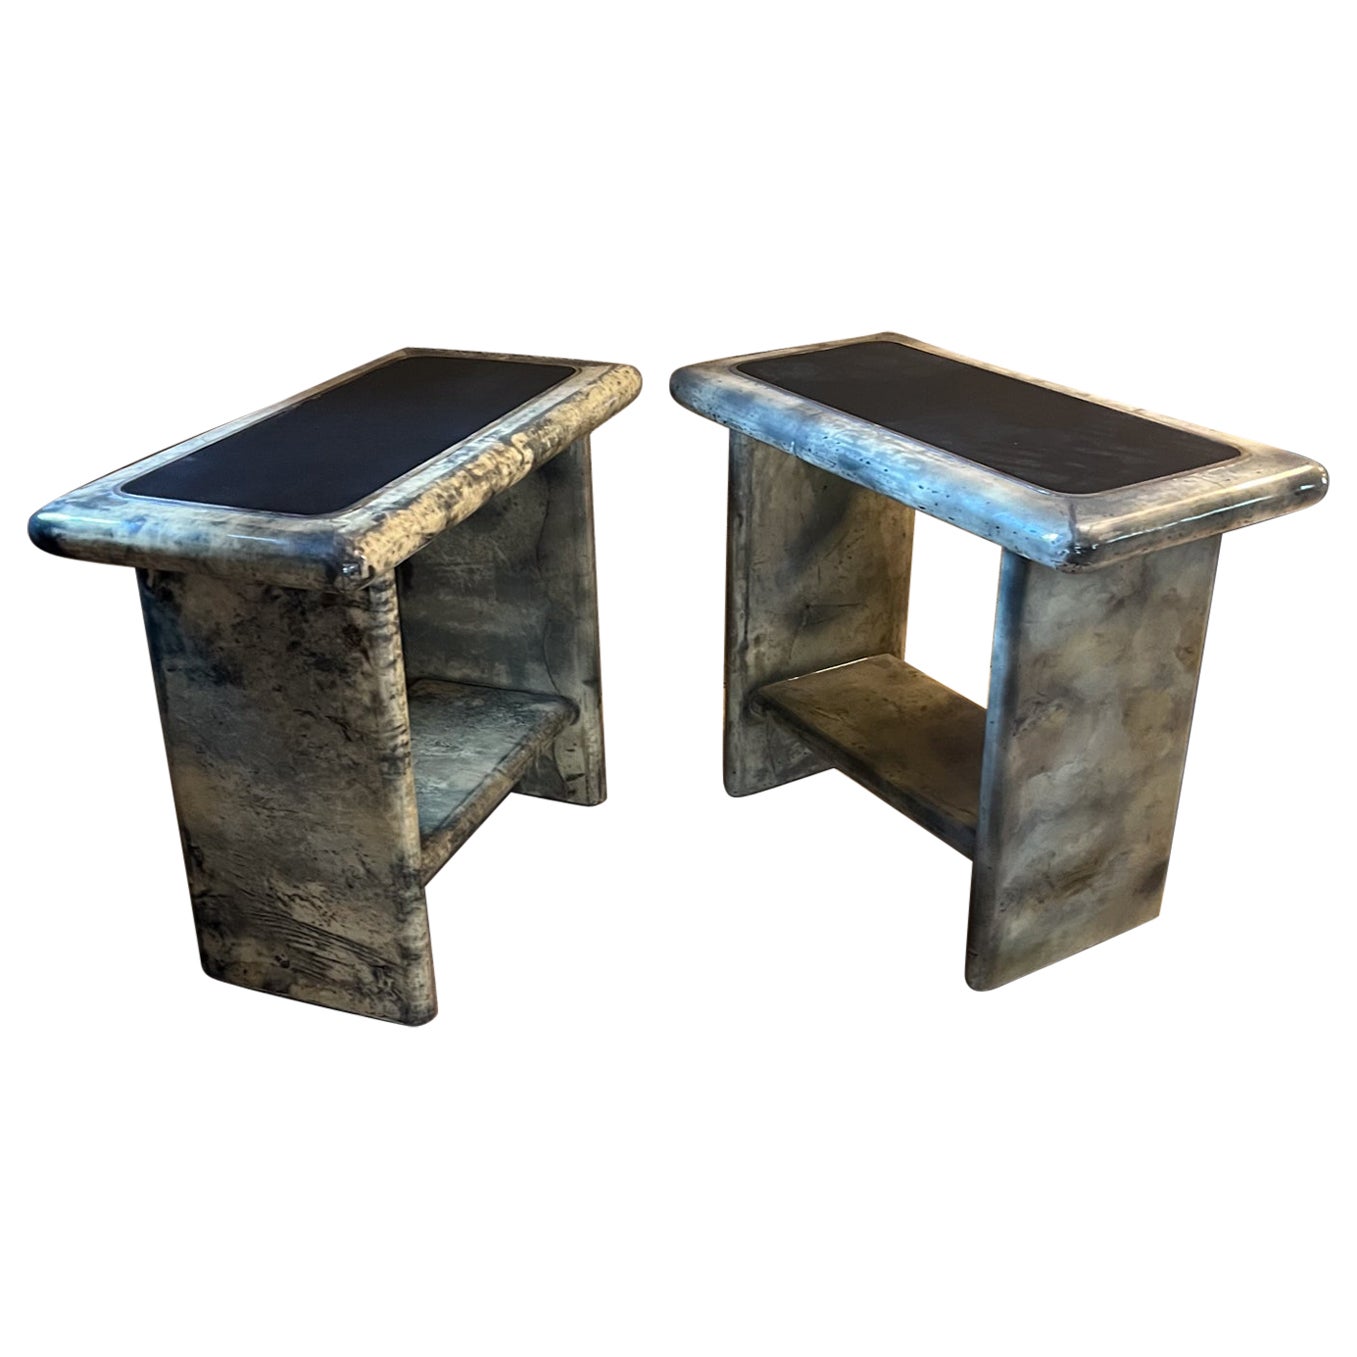 1960s Arturo Pani Side Tables Lacquered Goatskin Leather For Sale